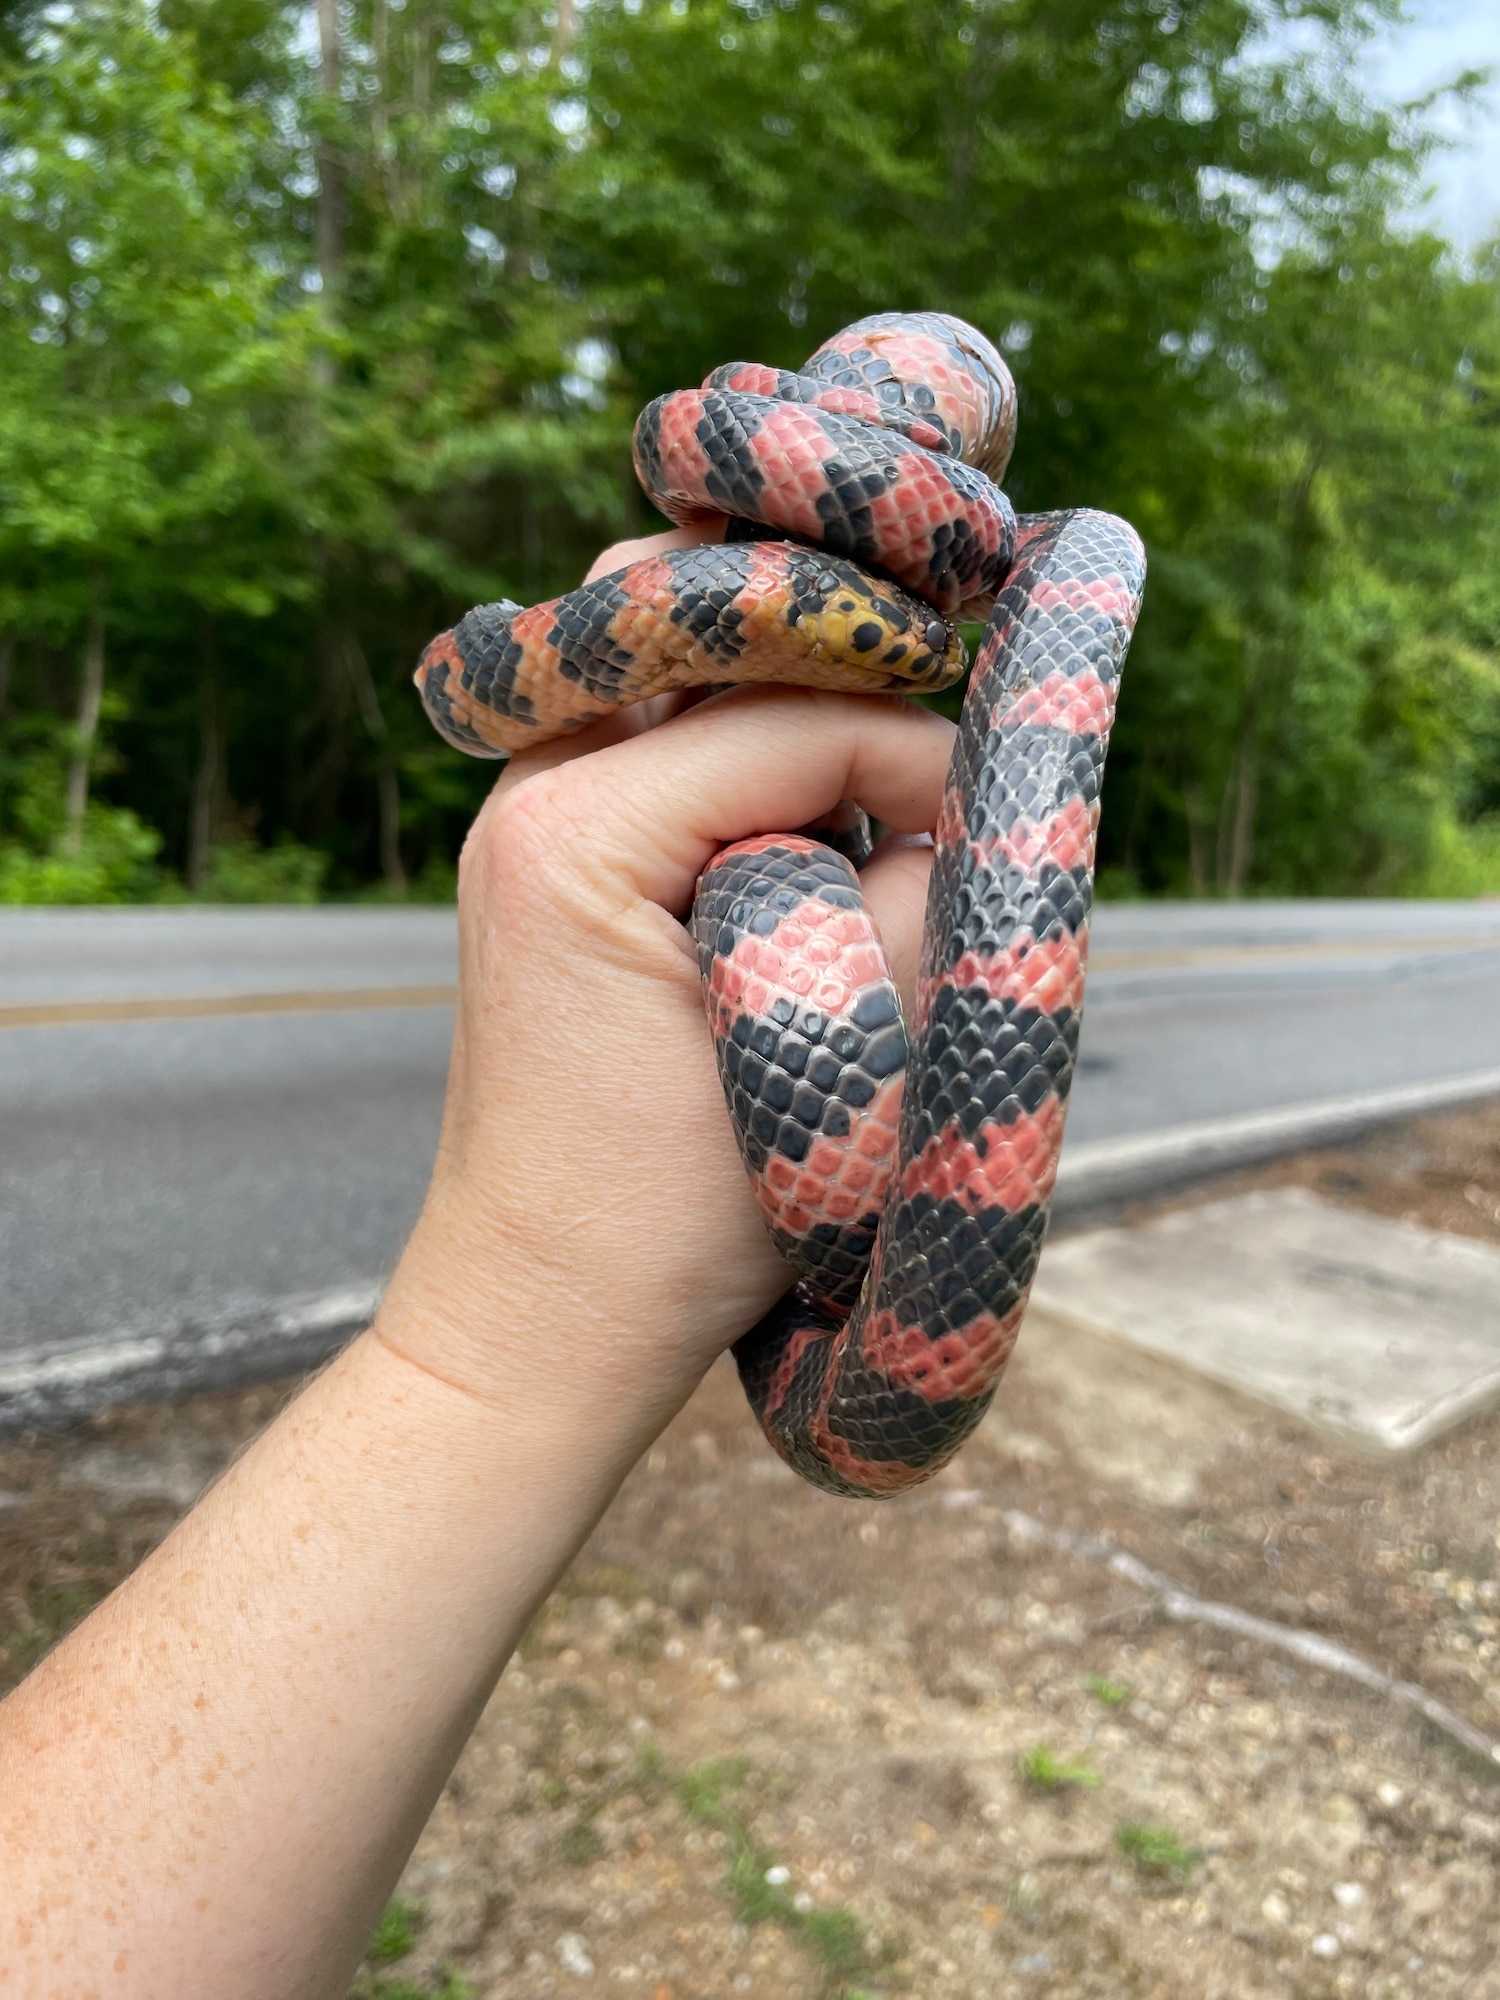 A person's hand with a snake wrapped around it